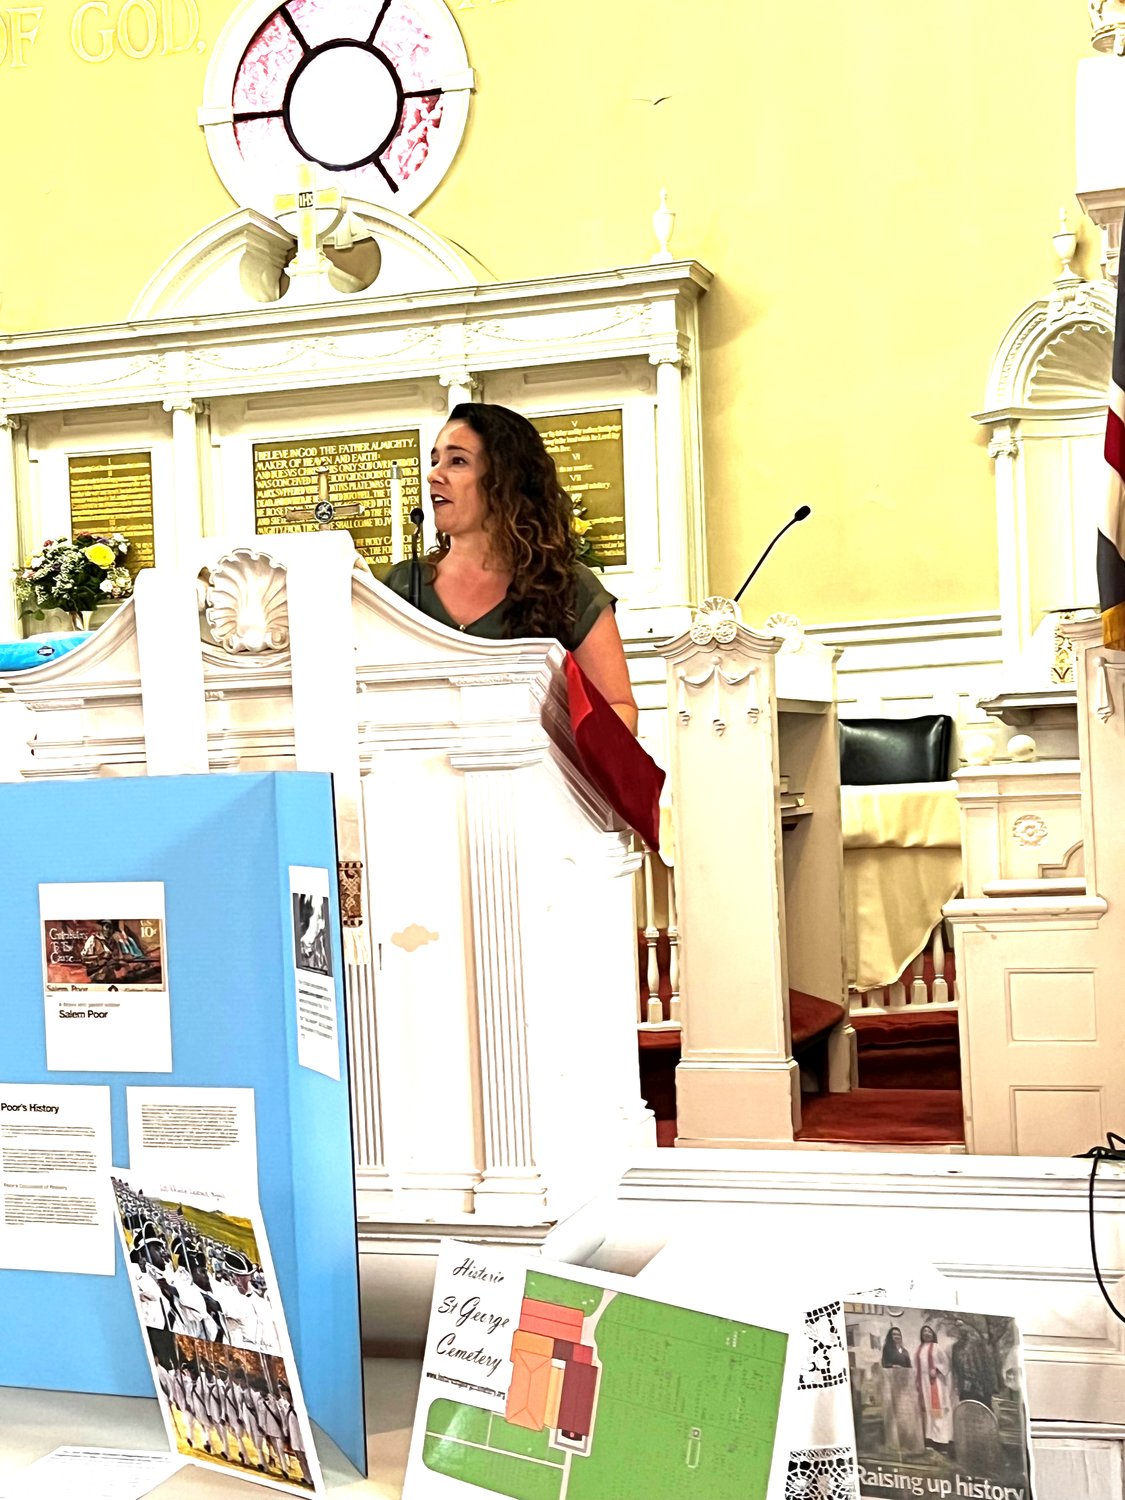 Historian Amy Vacchio, director of Rock Hall Museum in Lawrence, explained the massive project she has started, mapping the 700+ historic graves in the St. George’s churchyard and aiming for eventual restoration of the grave markers. The churchyard will become a walkable historic site.